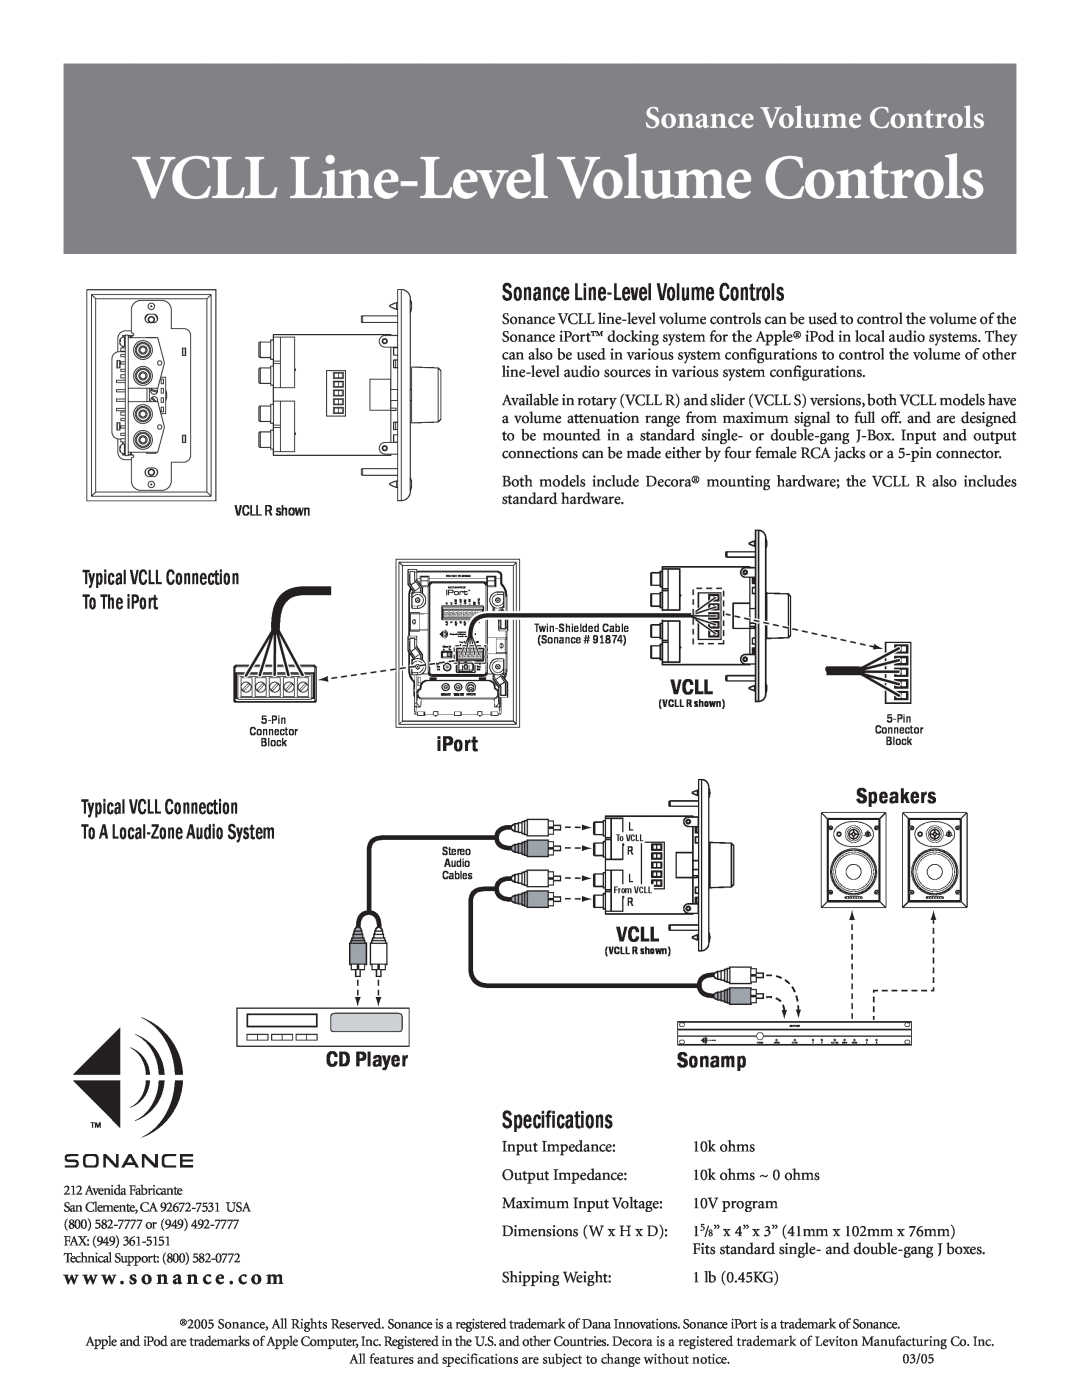 Sonance VCLL S specifications VCLL Line-LevelVolume Controls, Sonance Volume Controls, Sonance Line-LevelVolume Controls 